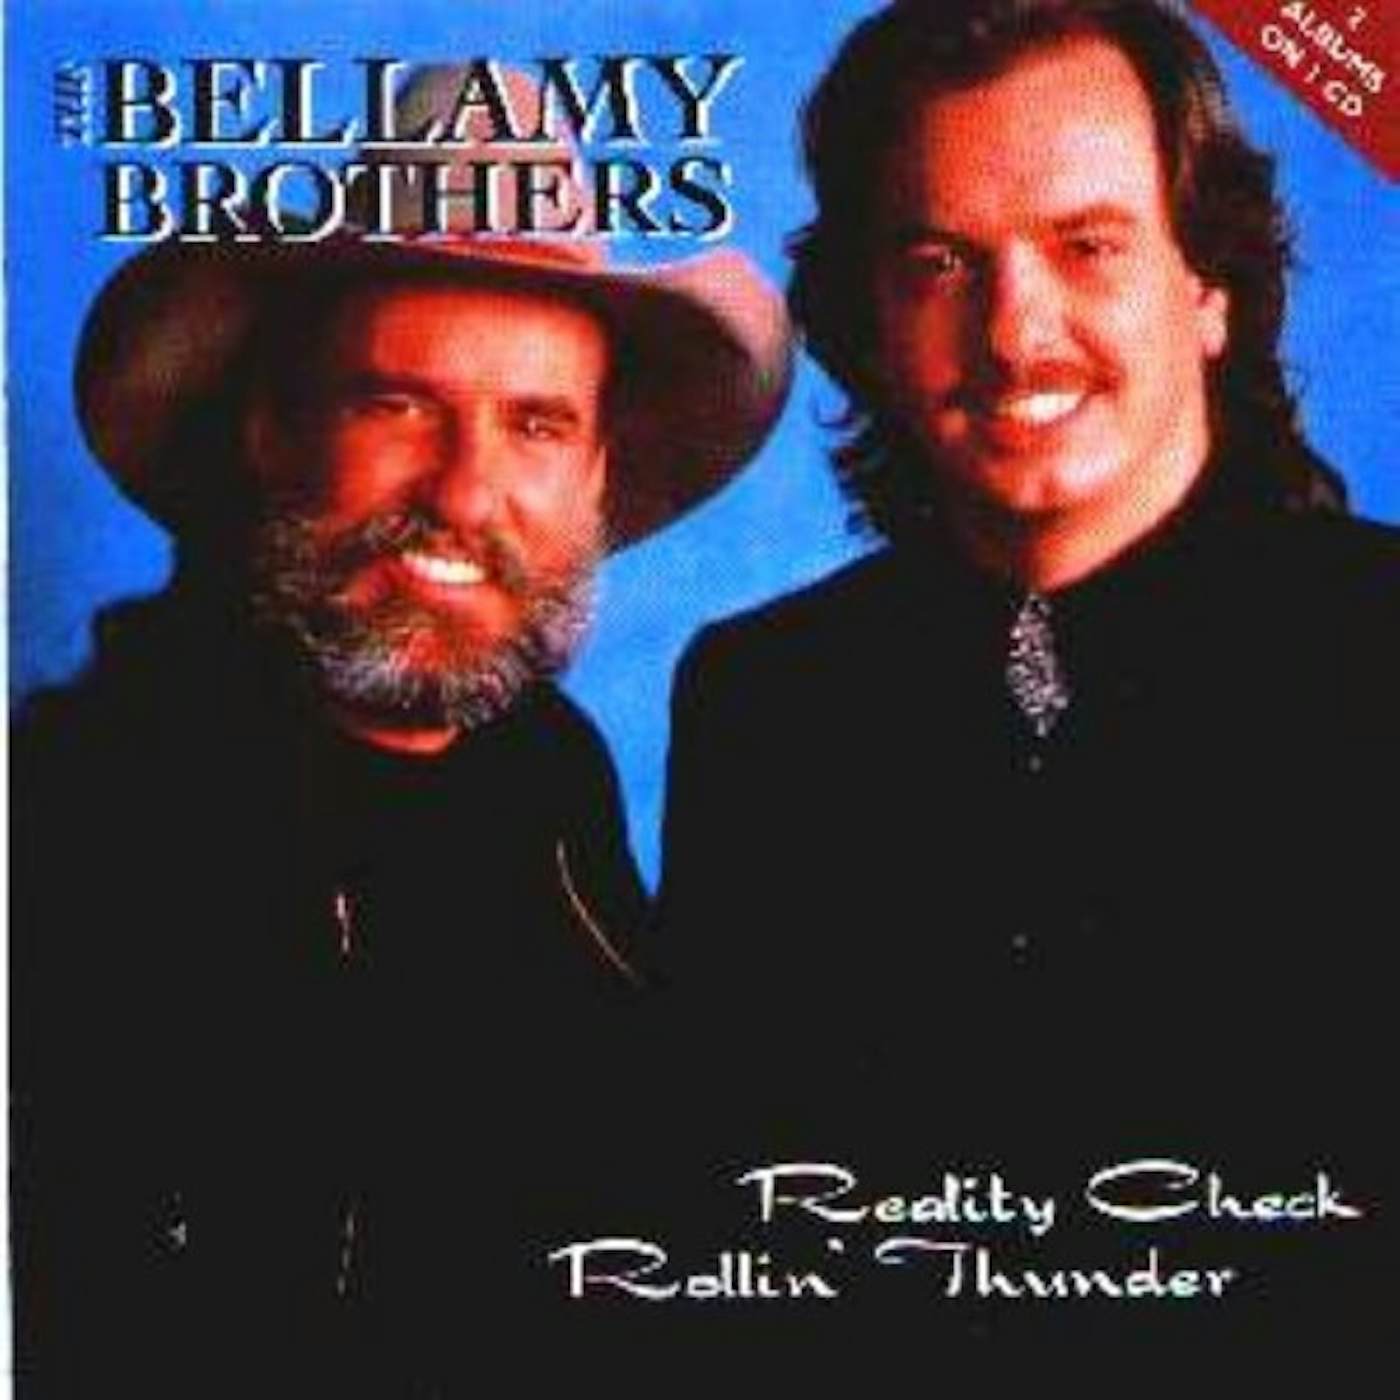 The Bellamy Brothers REALITY CHECK ROLLIN THUNDER CD